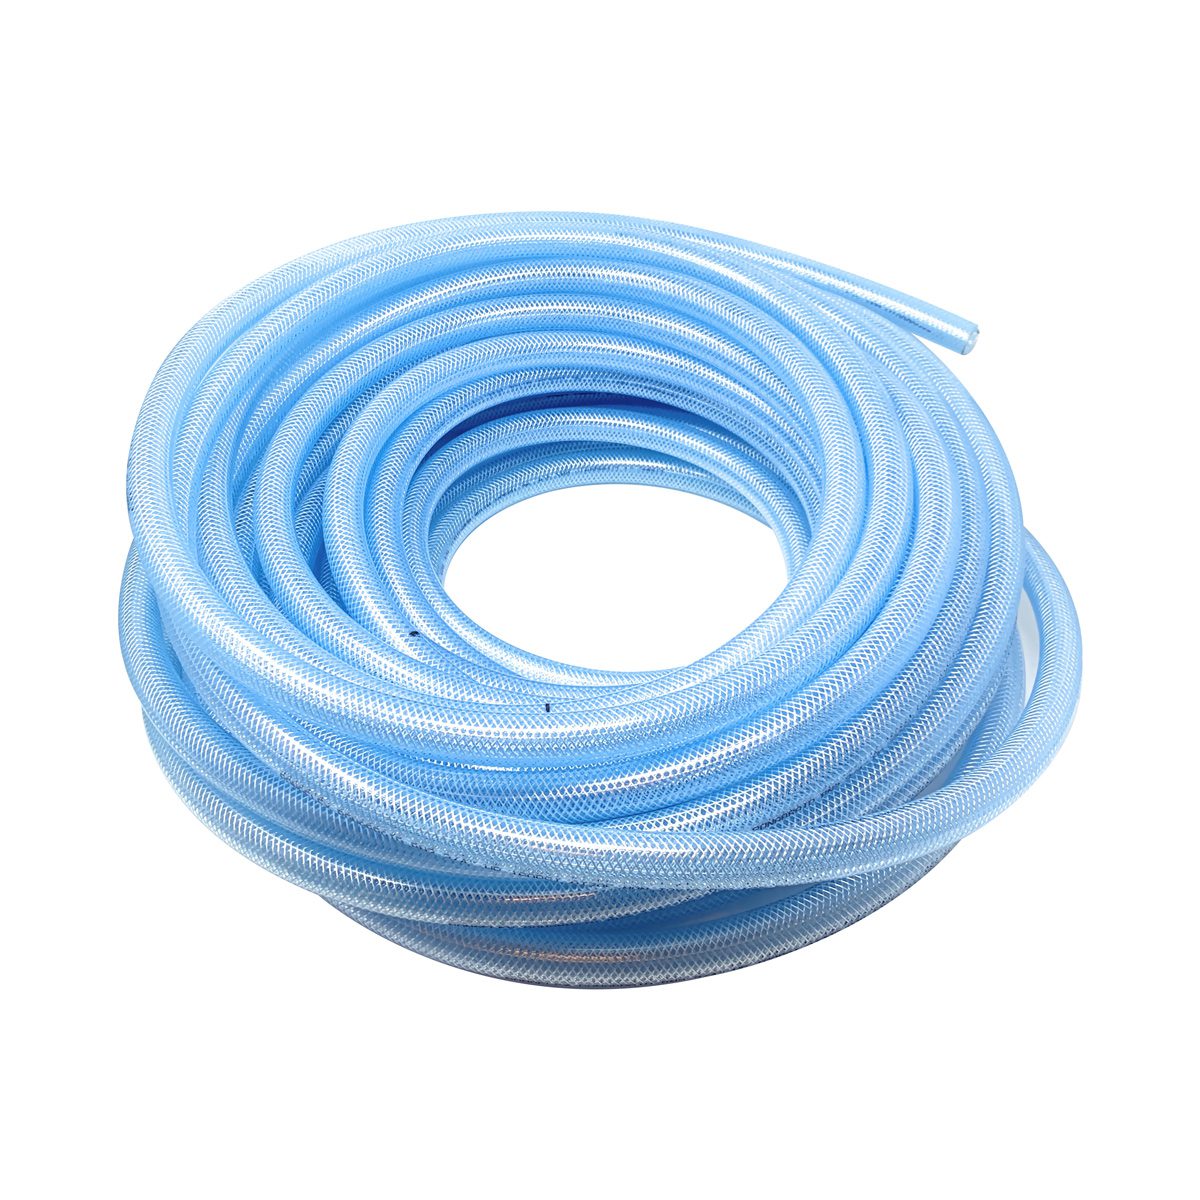 Gloxco 1-1/4 ID Clear PVC Suction Hose, 100' Length